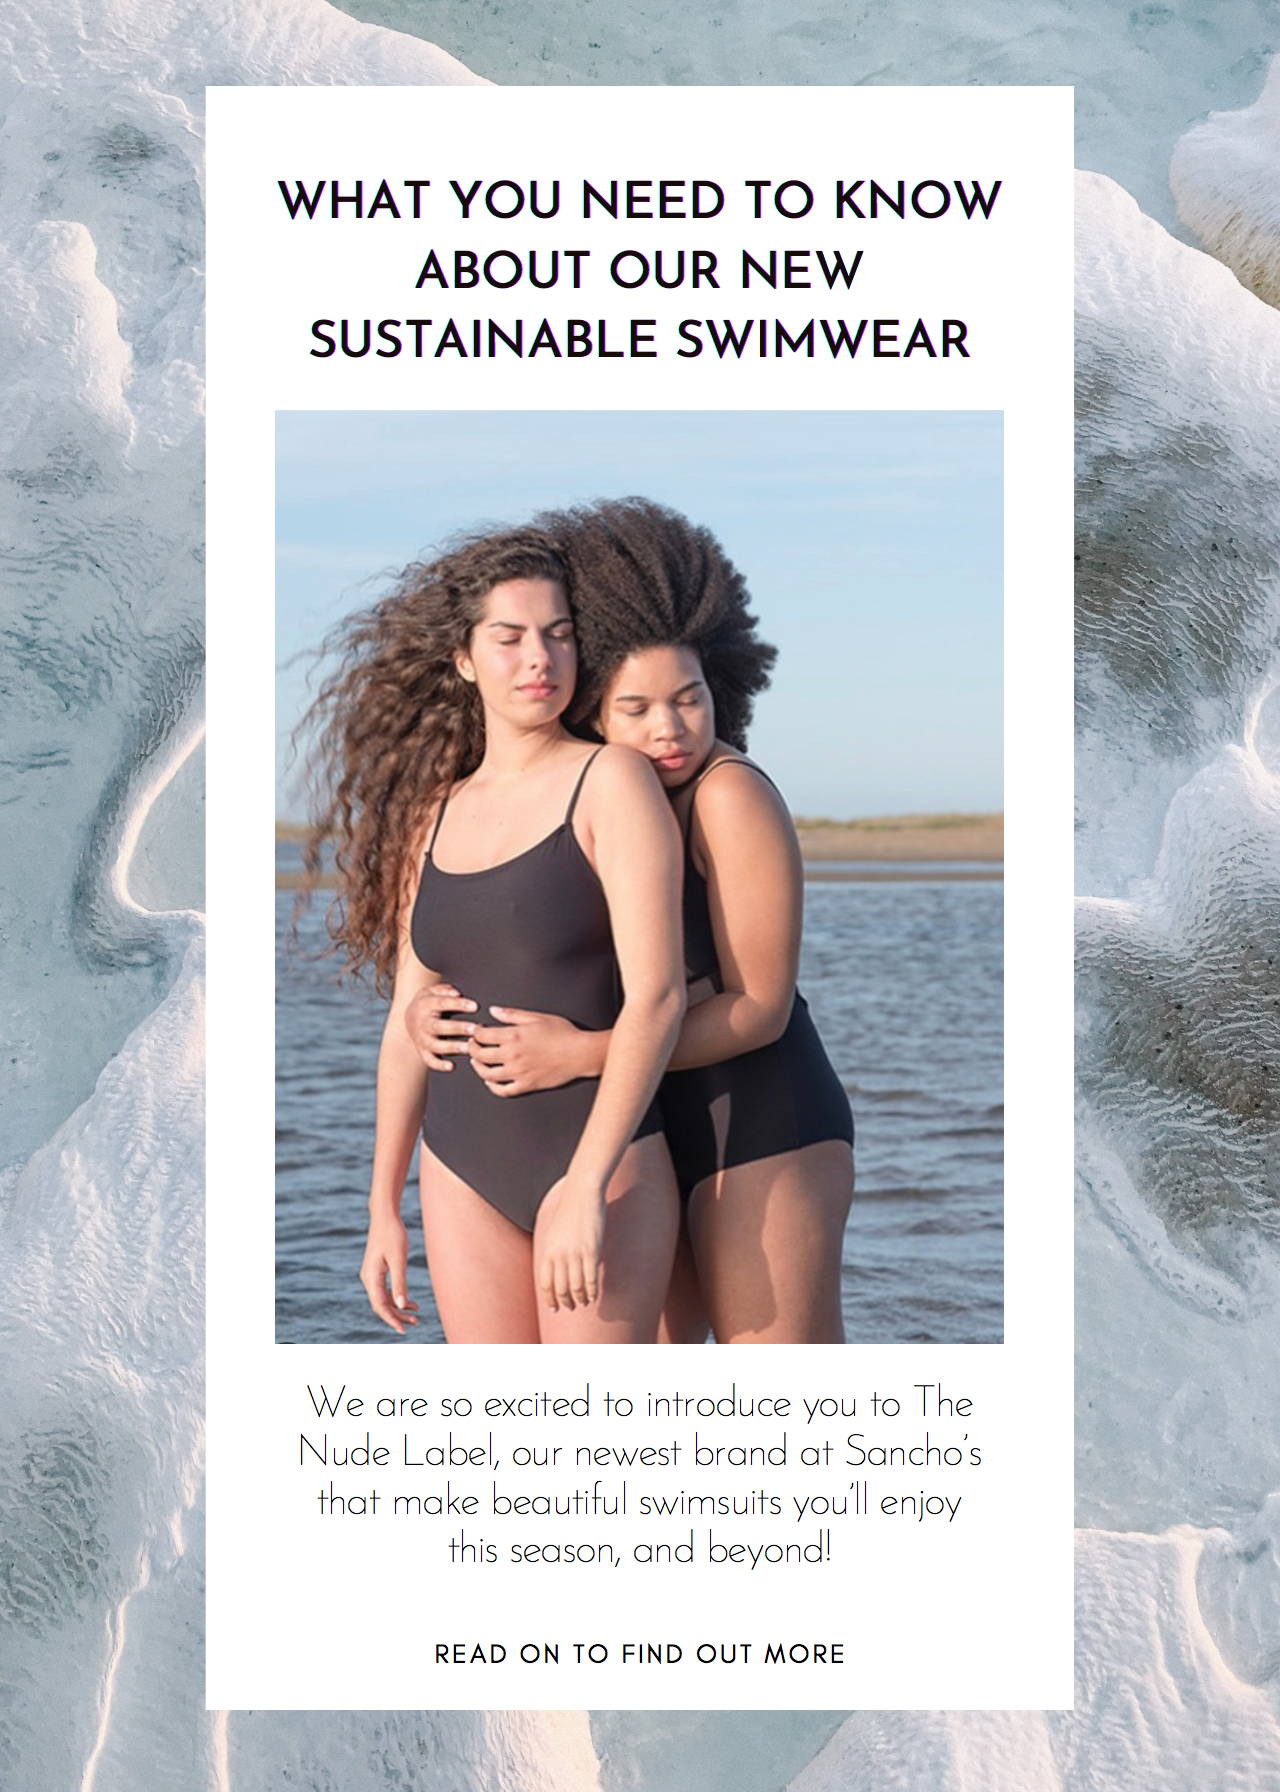 What You Need To Know About Our New Sustainable Swimwear